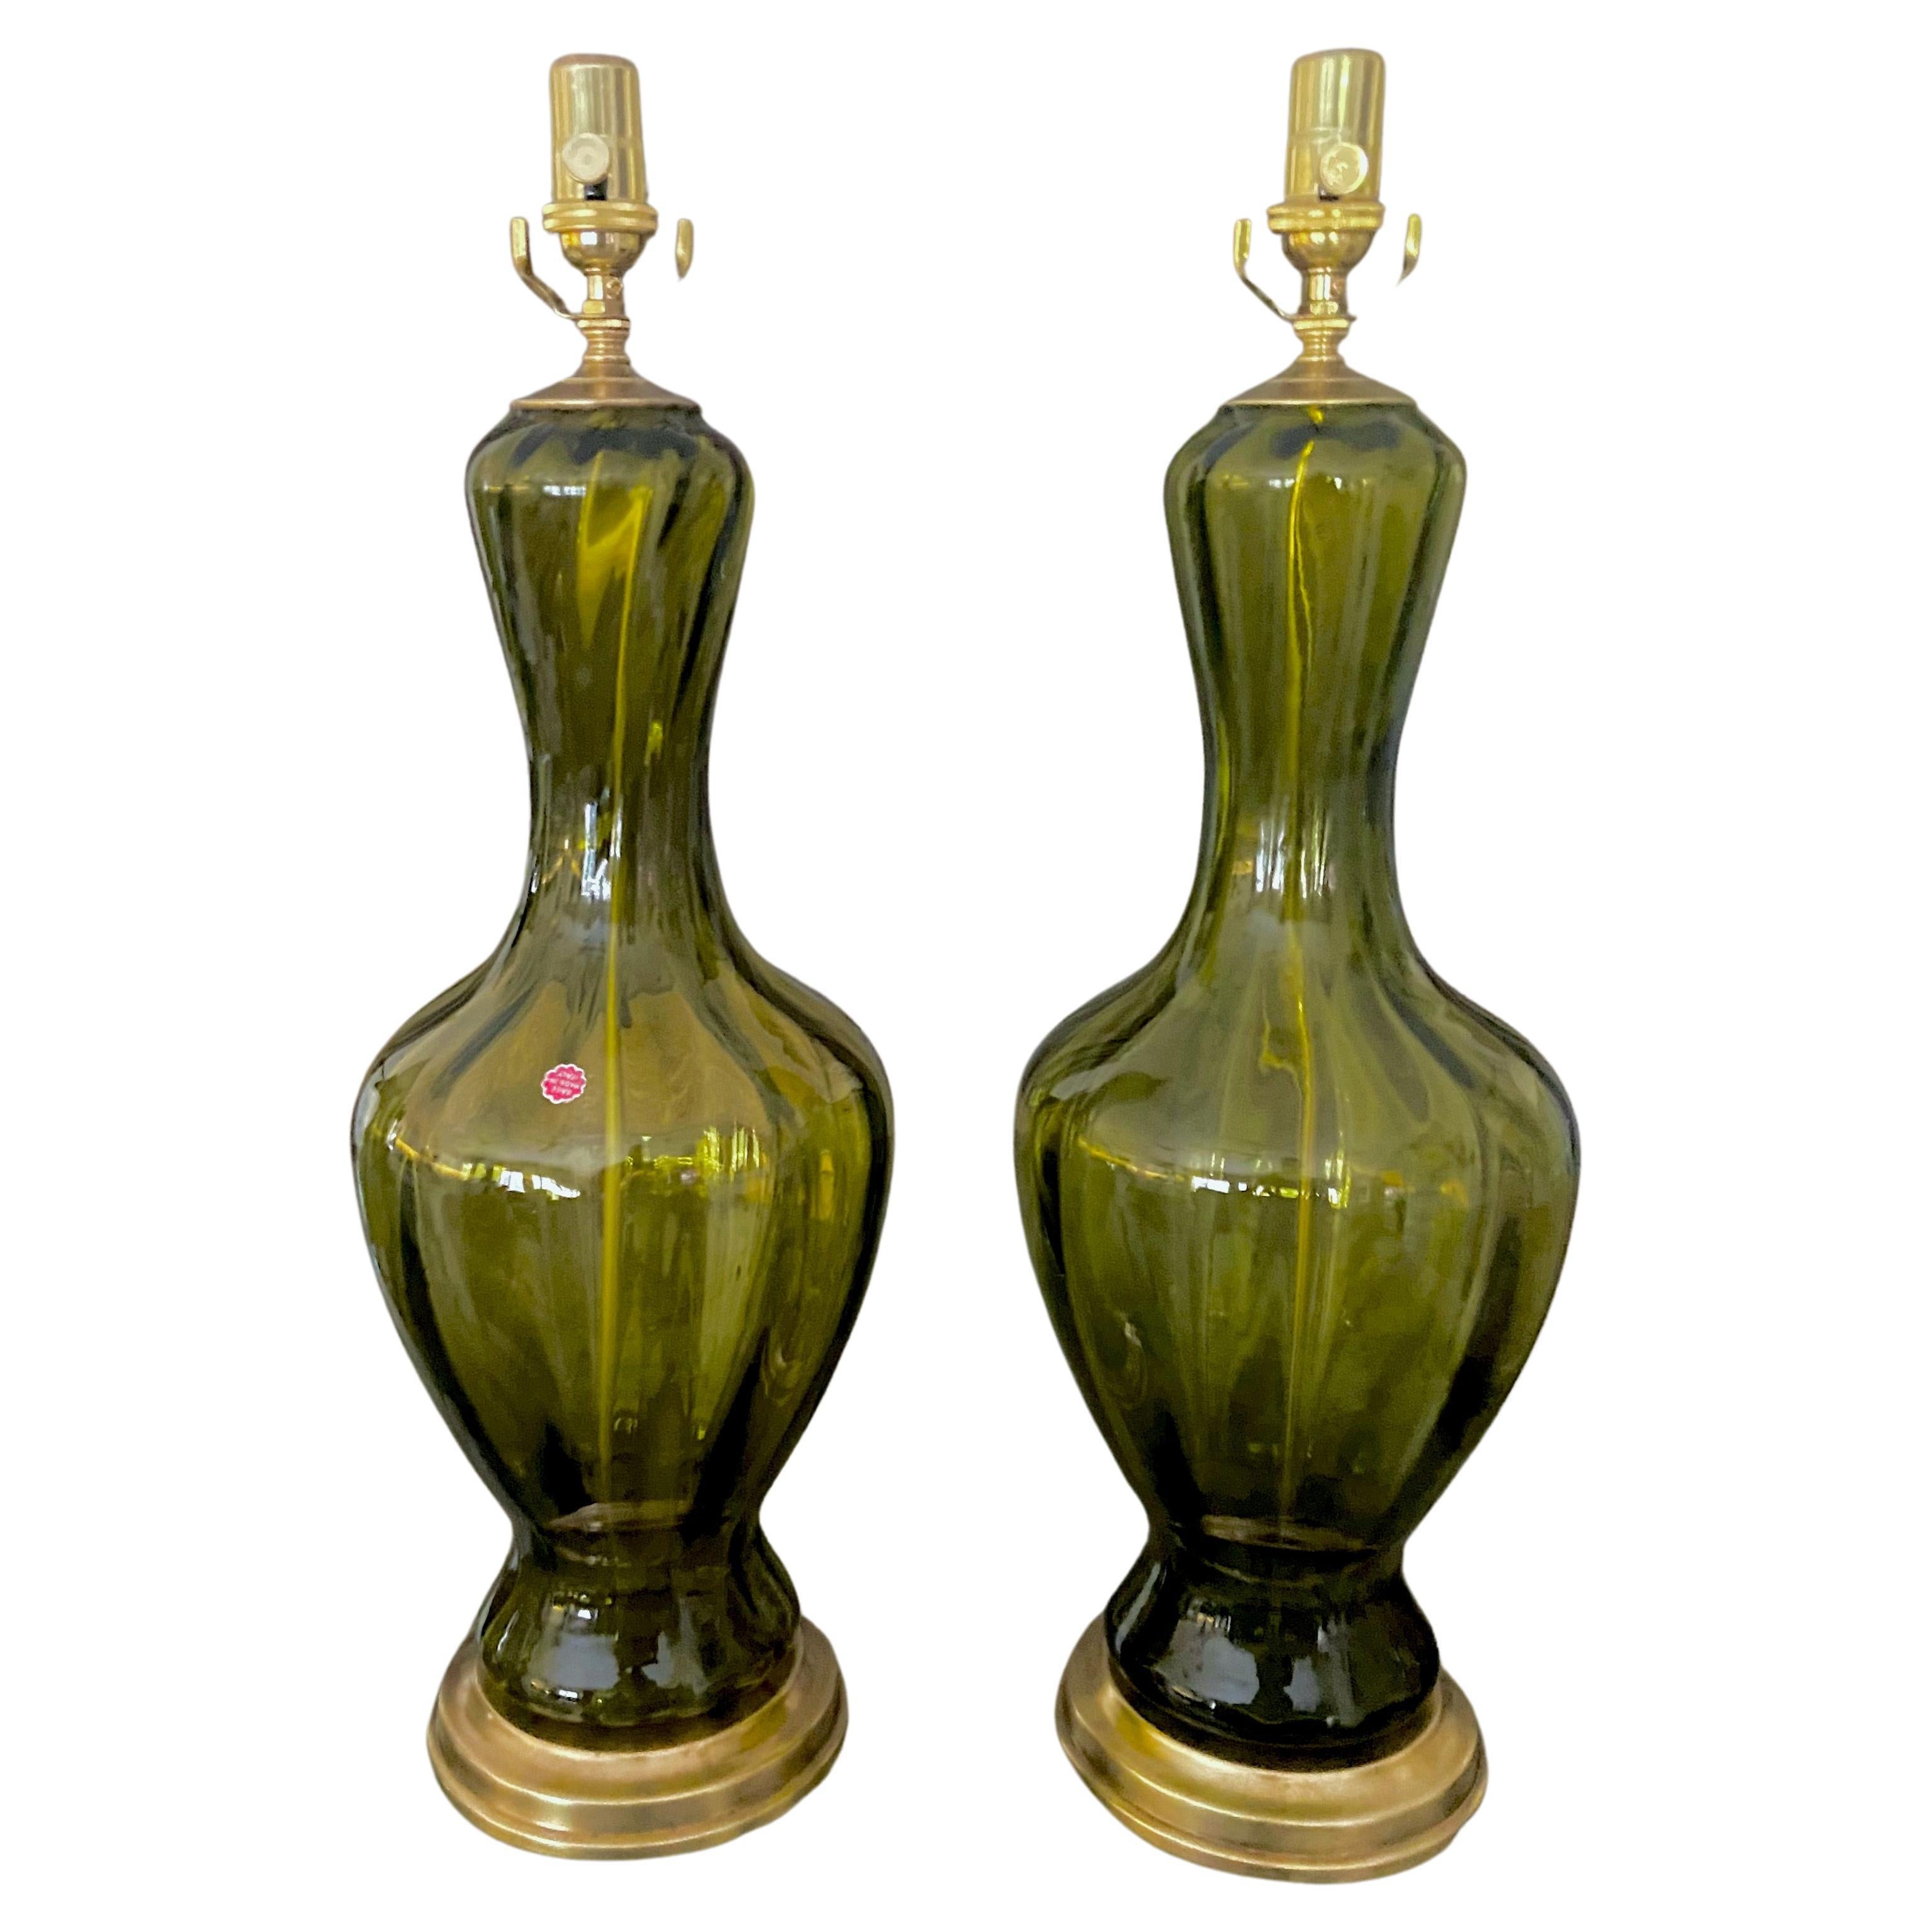 Pair of absinthe green colored Murano Venetian glass lamps on brass bases with brass fittings. Newly wired with new 3 way sockets and rayon cords.